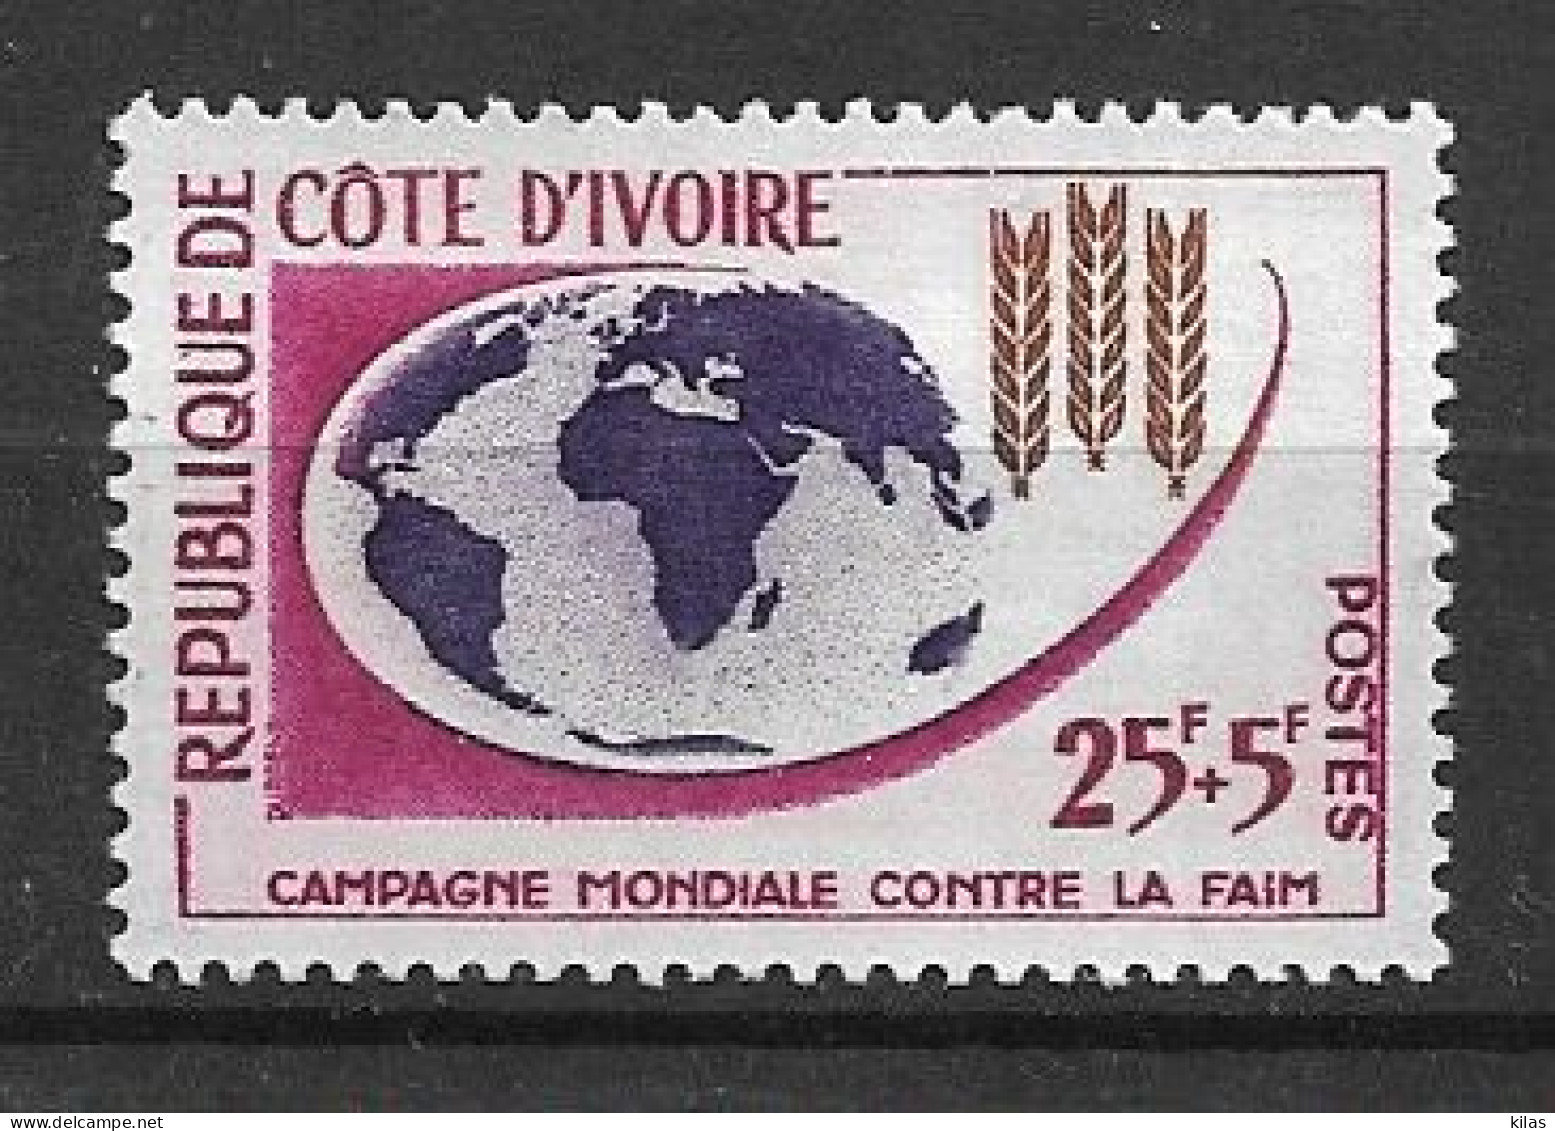 COTE D'IVOIRE 1963 FREEDOM FROM HUNGER MNH - Ernährung